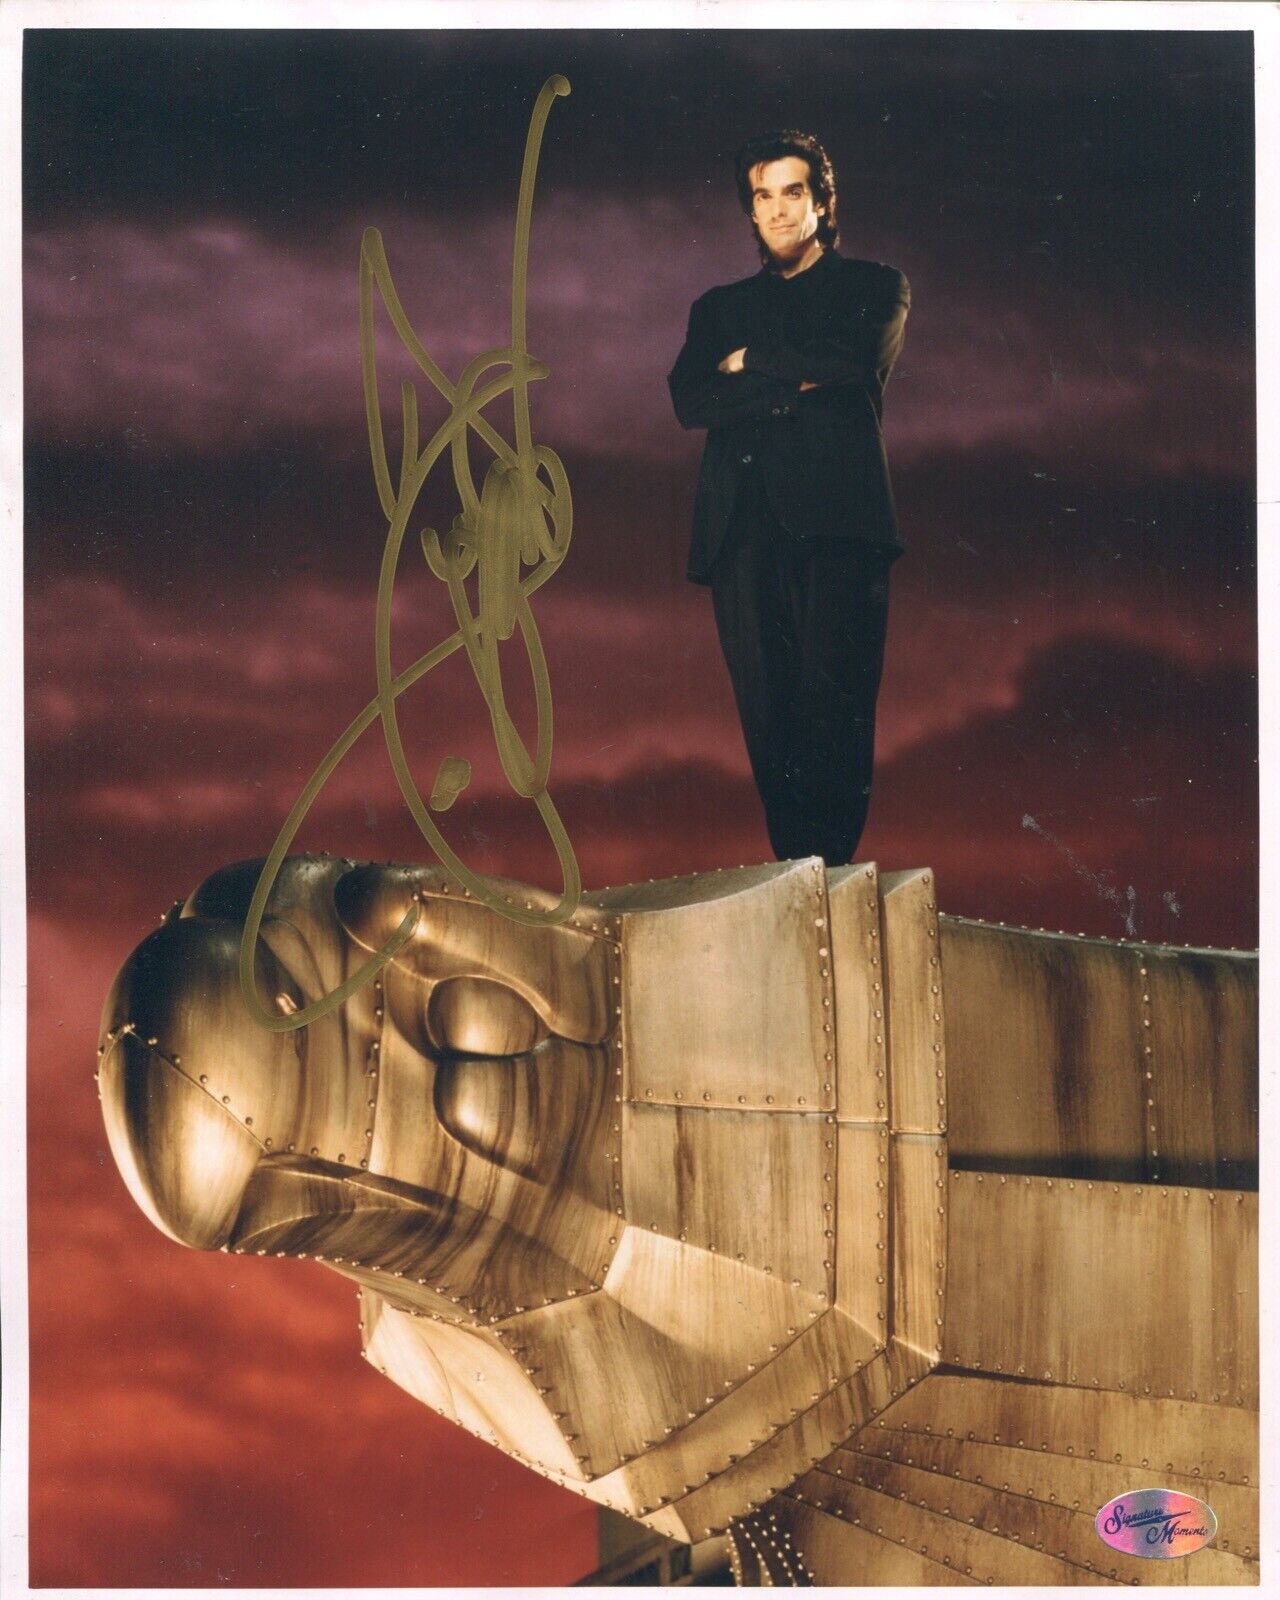 Illusionist Magician David Copperfield signed 8x10 Photo Poster painting